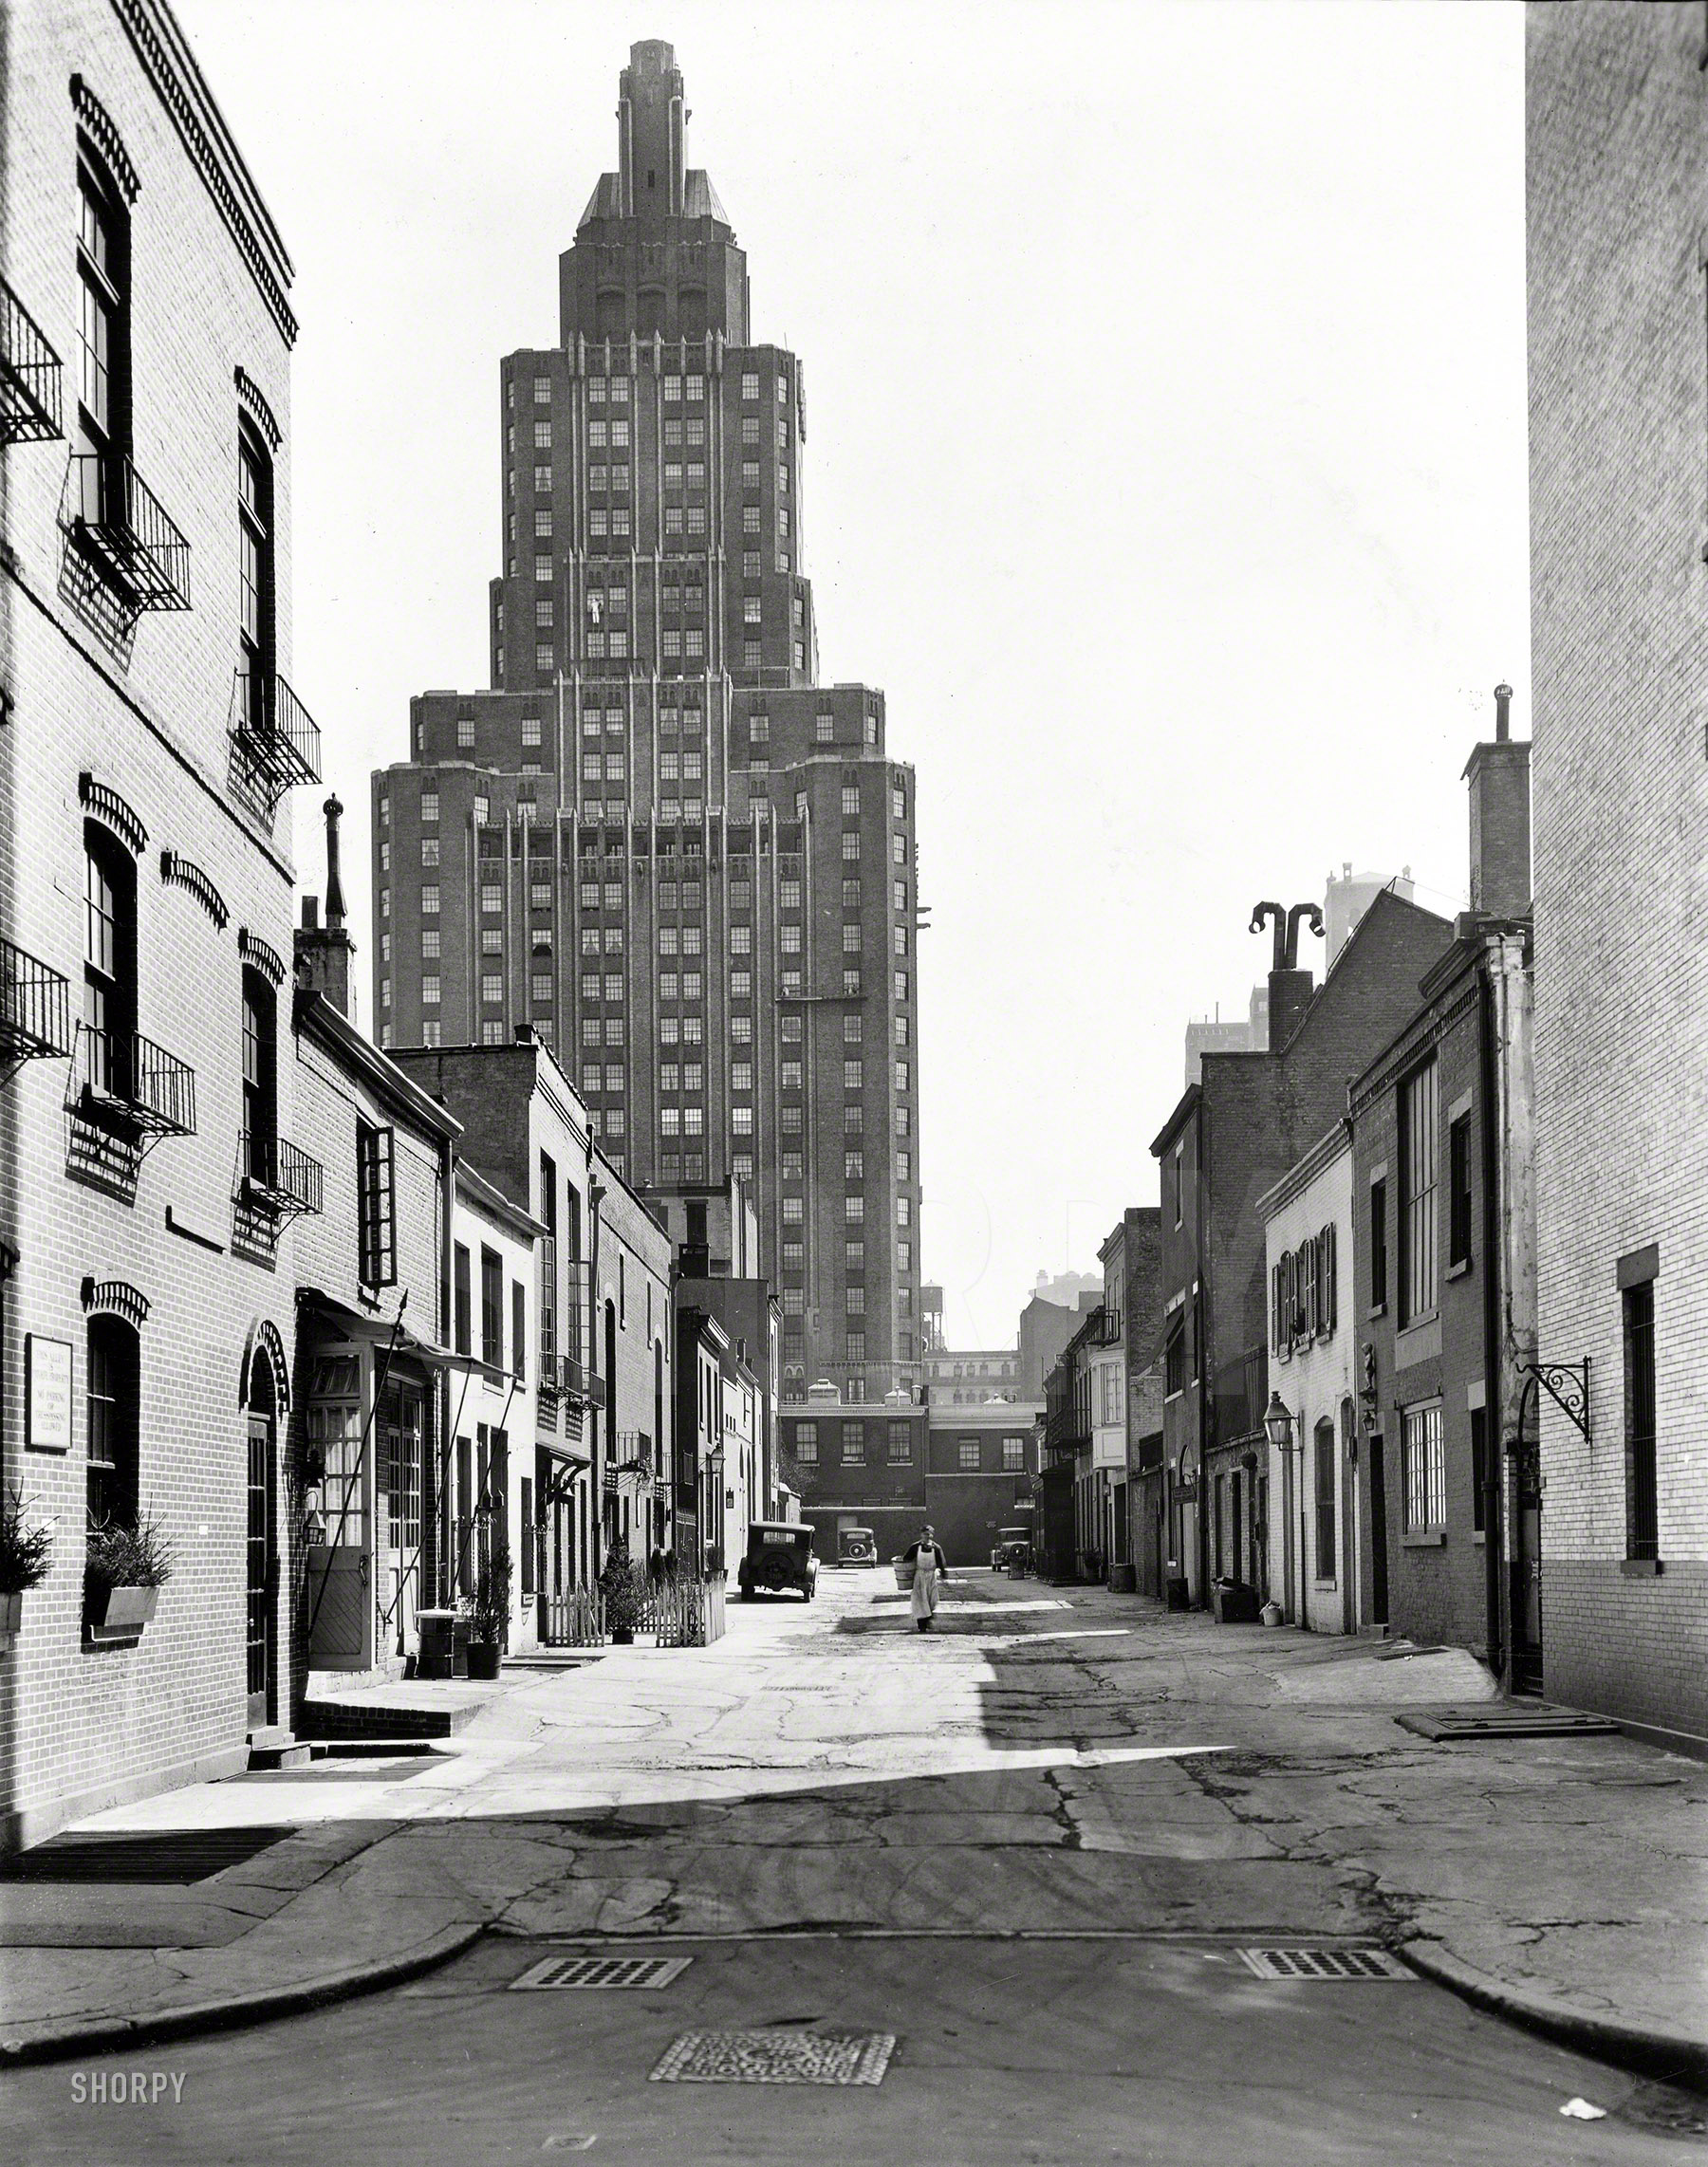 March 20, 1936. "Macdougal Alley, between West 8th Street and Washington Square North, Manhattan. 1 Fifth Avenue rises above." 8x10 gelatin silver print by Berenice Abbott for the Federal Art Project. View full size.